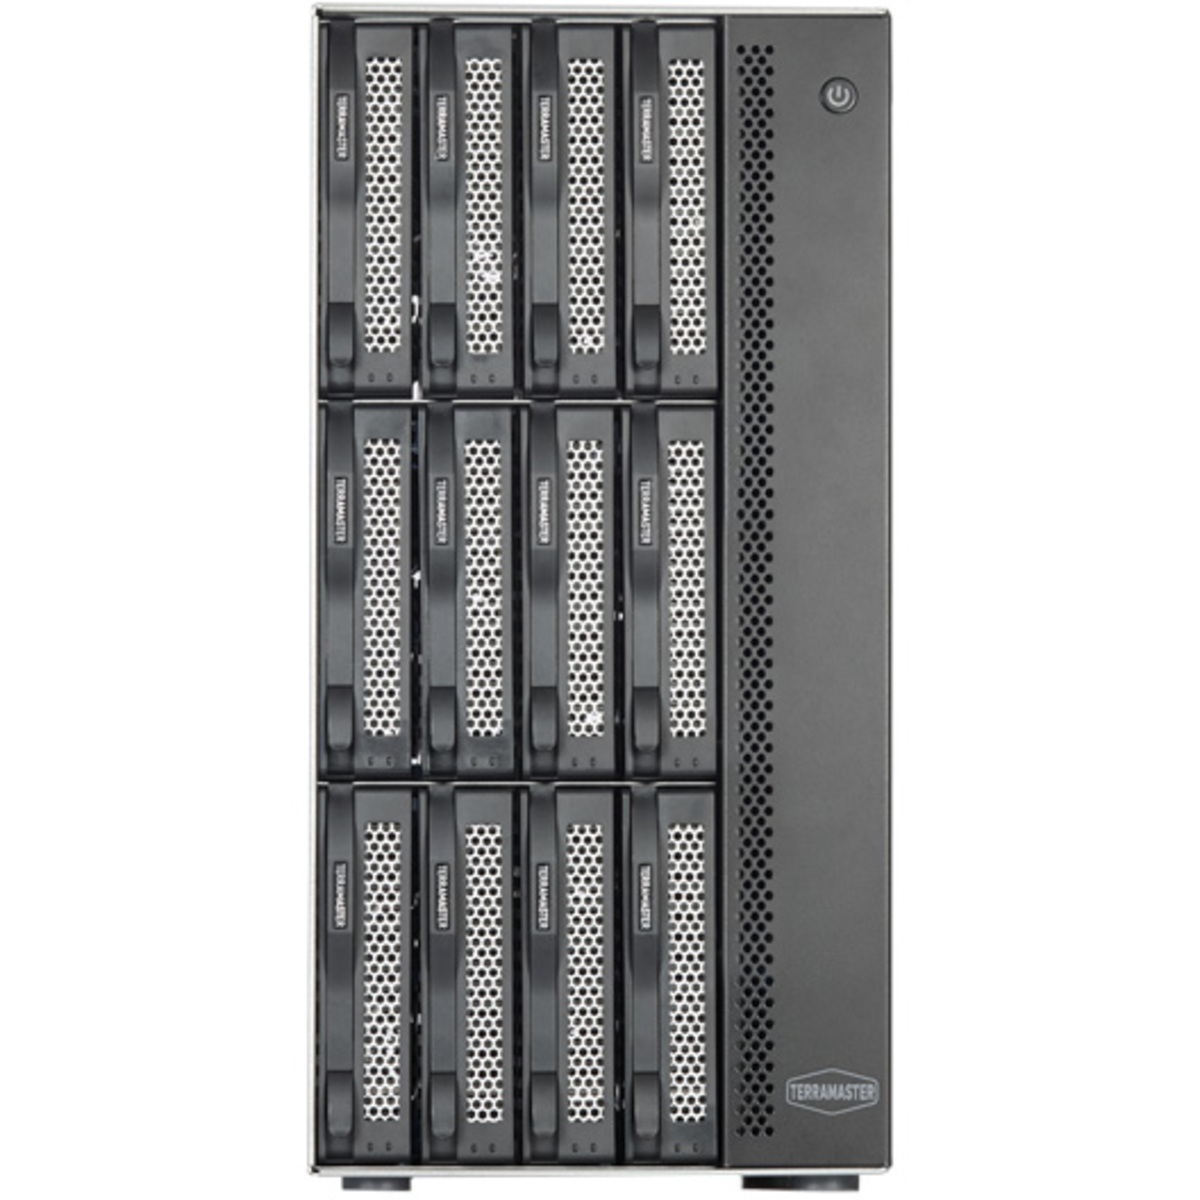 TerraMaster T12-450 18tb 12-Bay Desktop Multimedia / Power User / Business NAS - Network Attached Storage Device 9x2tb Seagate IronWolf Pro ST2000NT001 3.5 7200rpm SATA 6Gb/s HDD NAS Class Drives Installed - Burn-In Tested T12-450